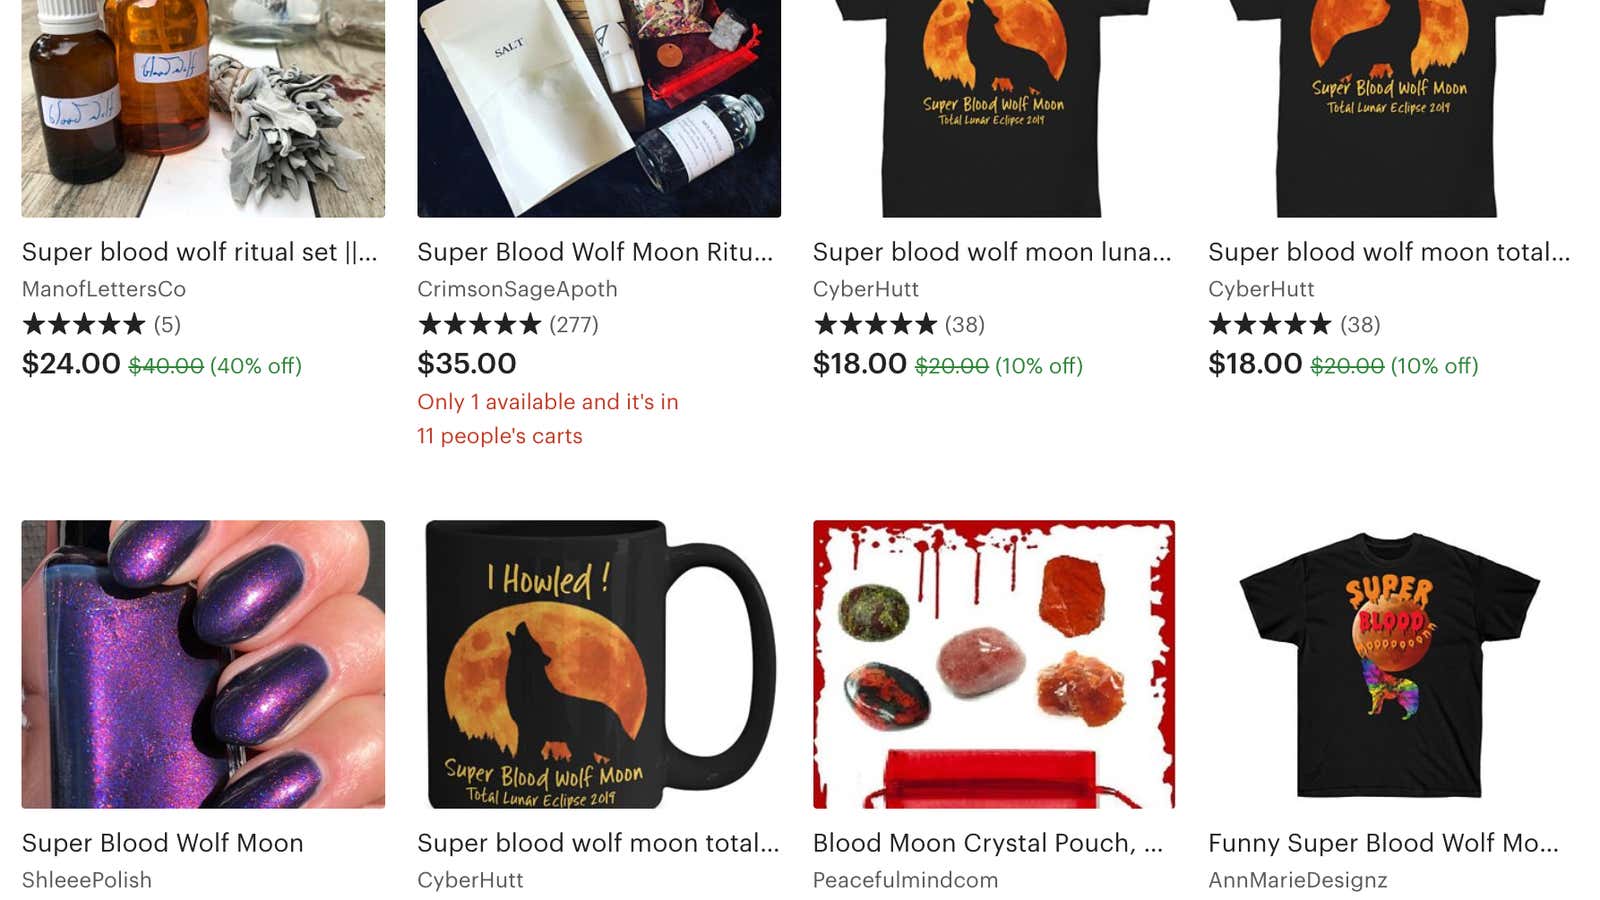 Etsy shops are cashing in on the “super blood wolf moon”